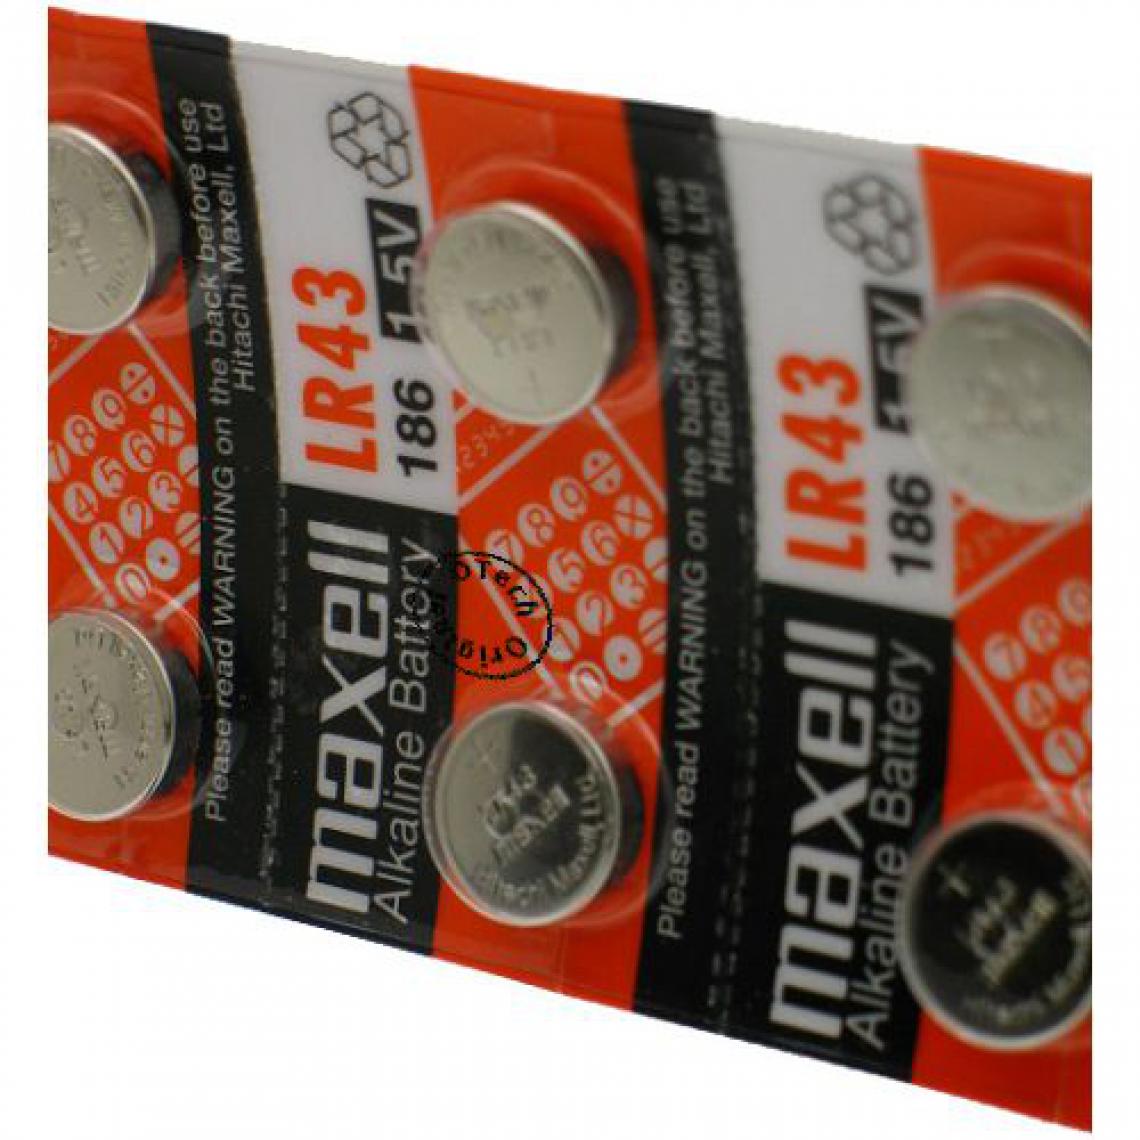 Otech - Pack de 10 piles maxell pour MAXELL 186 - Piles rechargeables